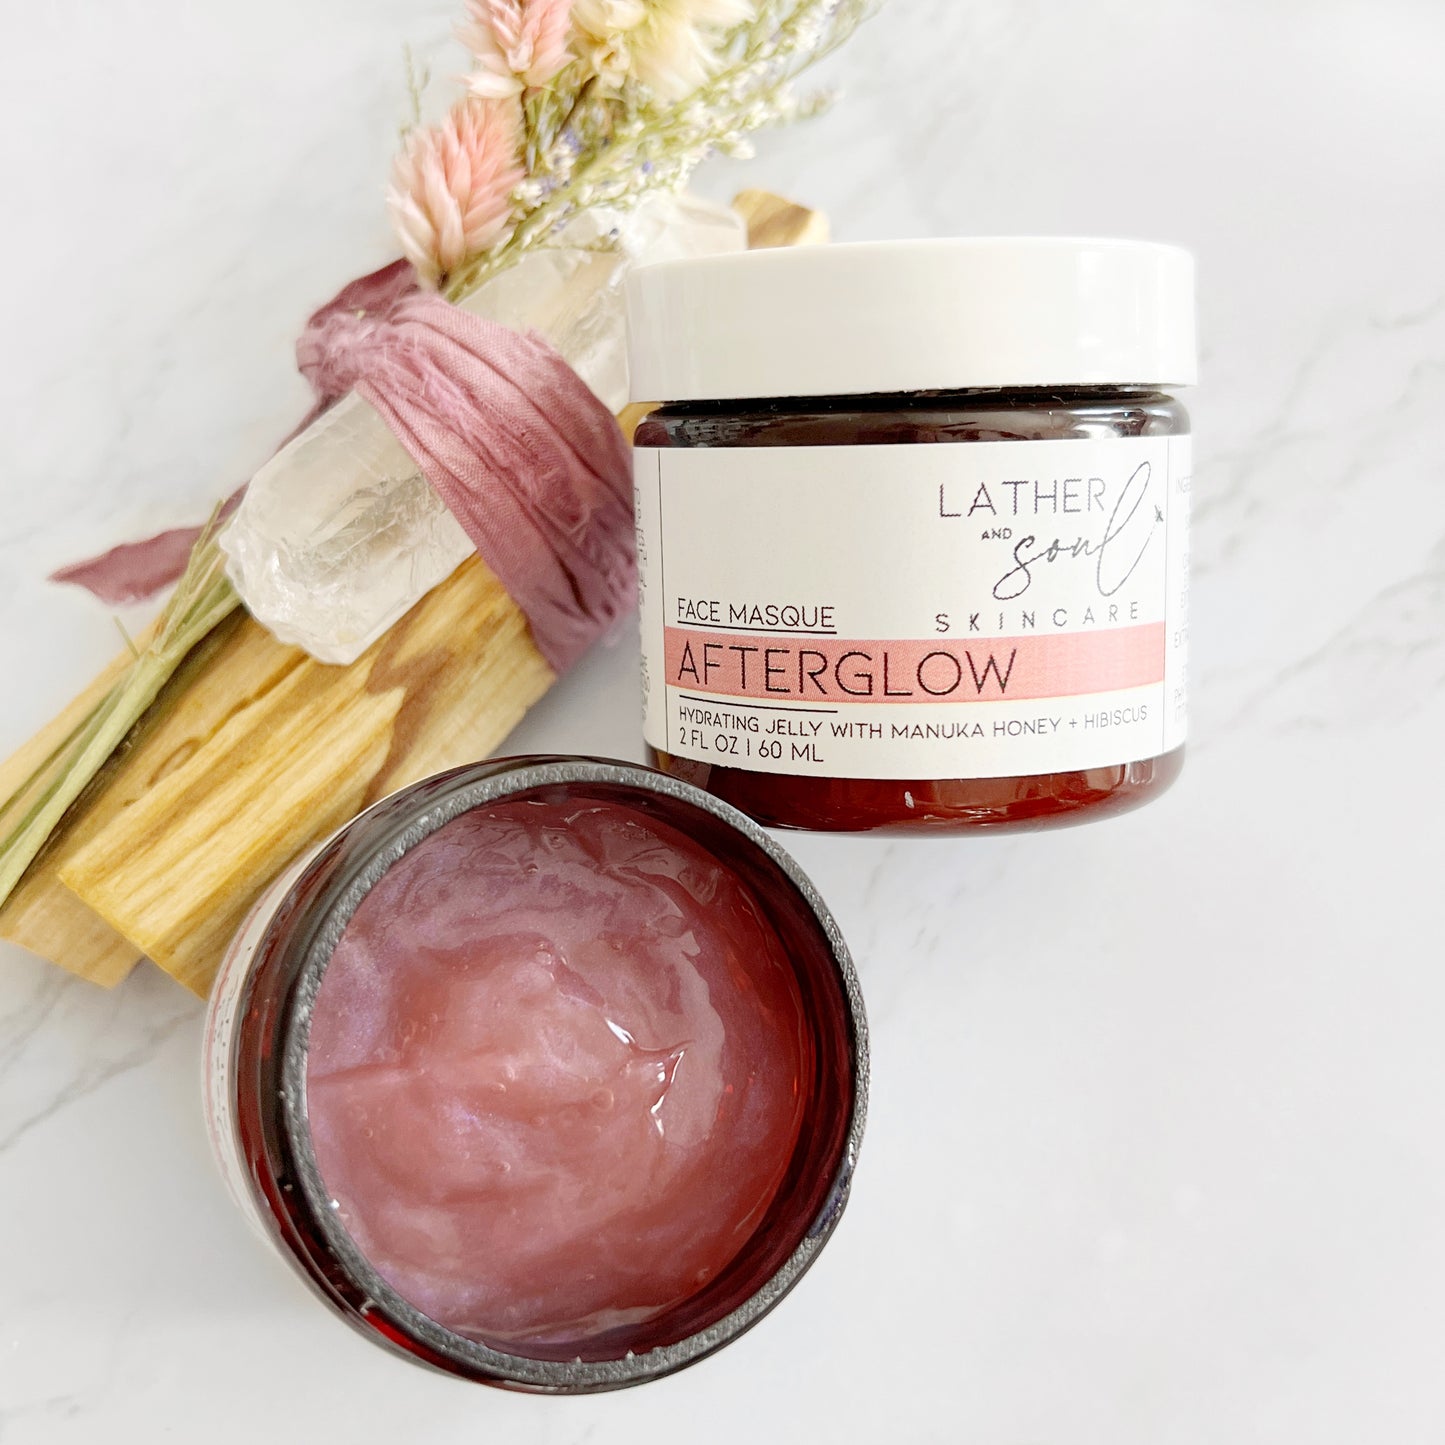 The best hydration Jelly Masque Homemade face mask by Lather and Soul Skincare